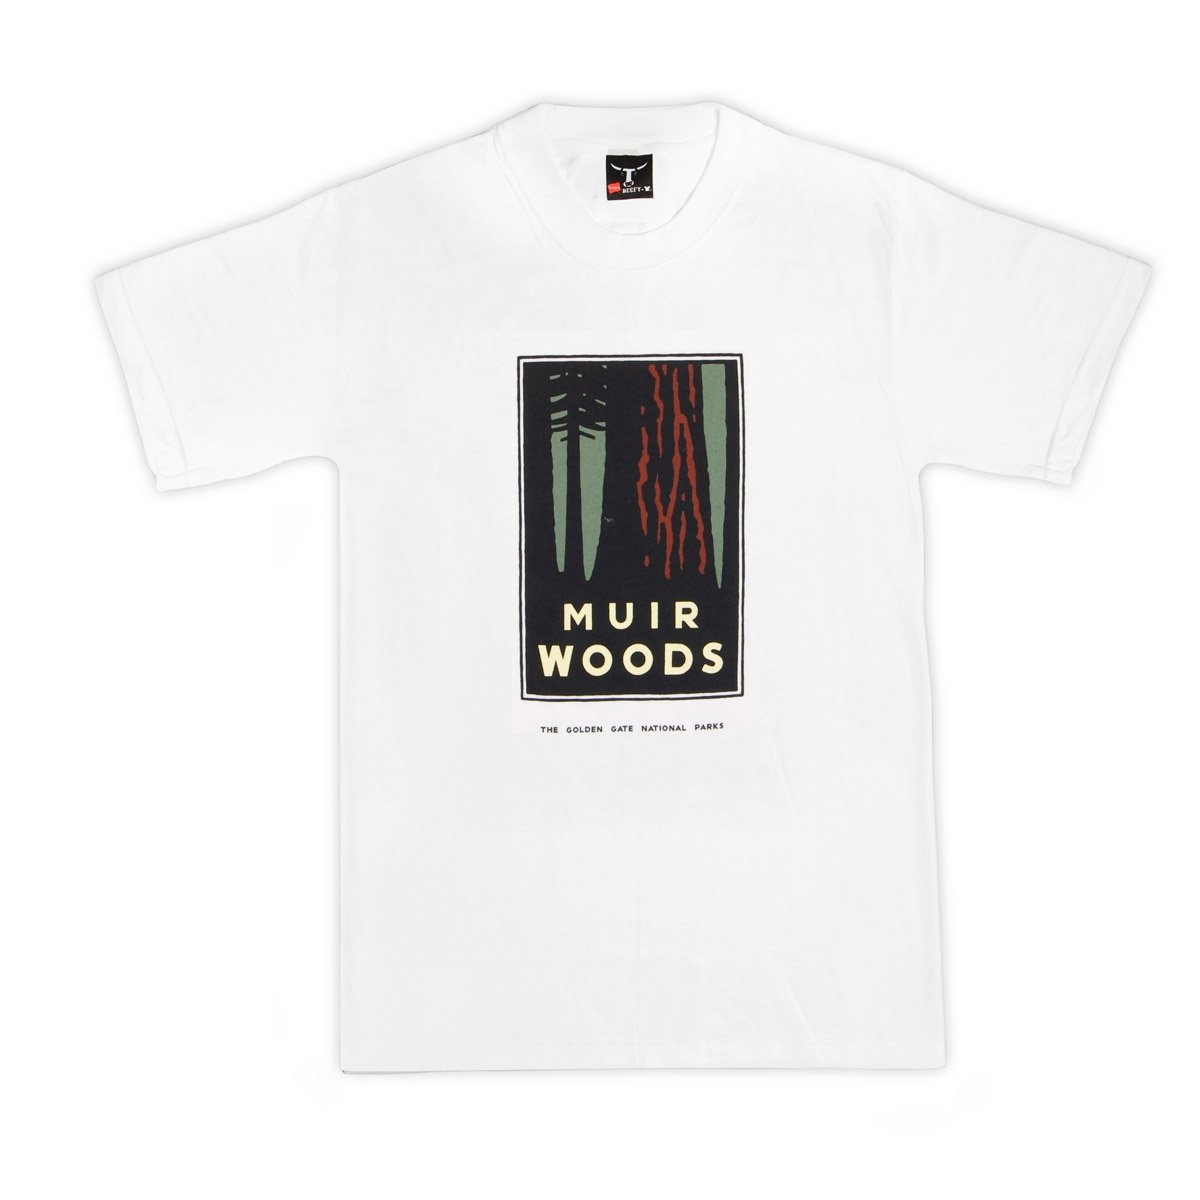 White graphic t-shirt with colorful screen-printed design of Muir Woods on chest. Artwork by Michael Schwab.